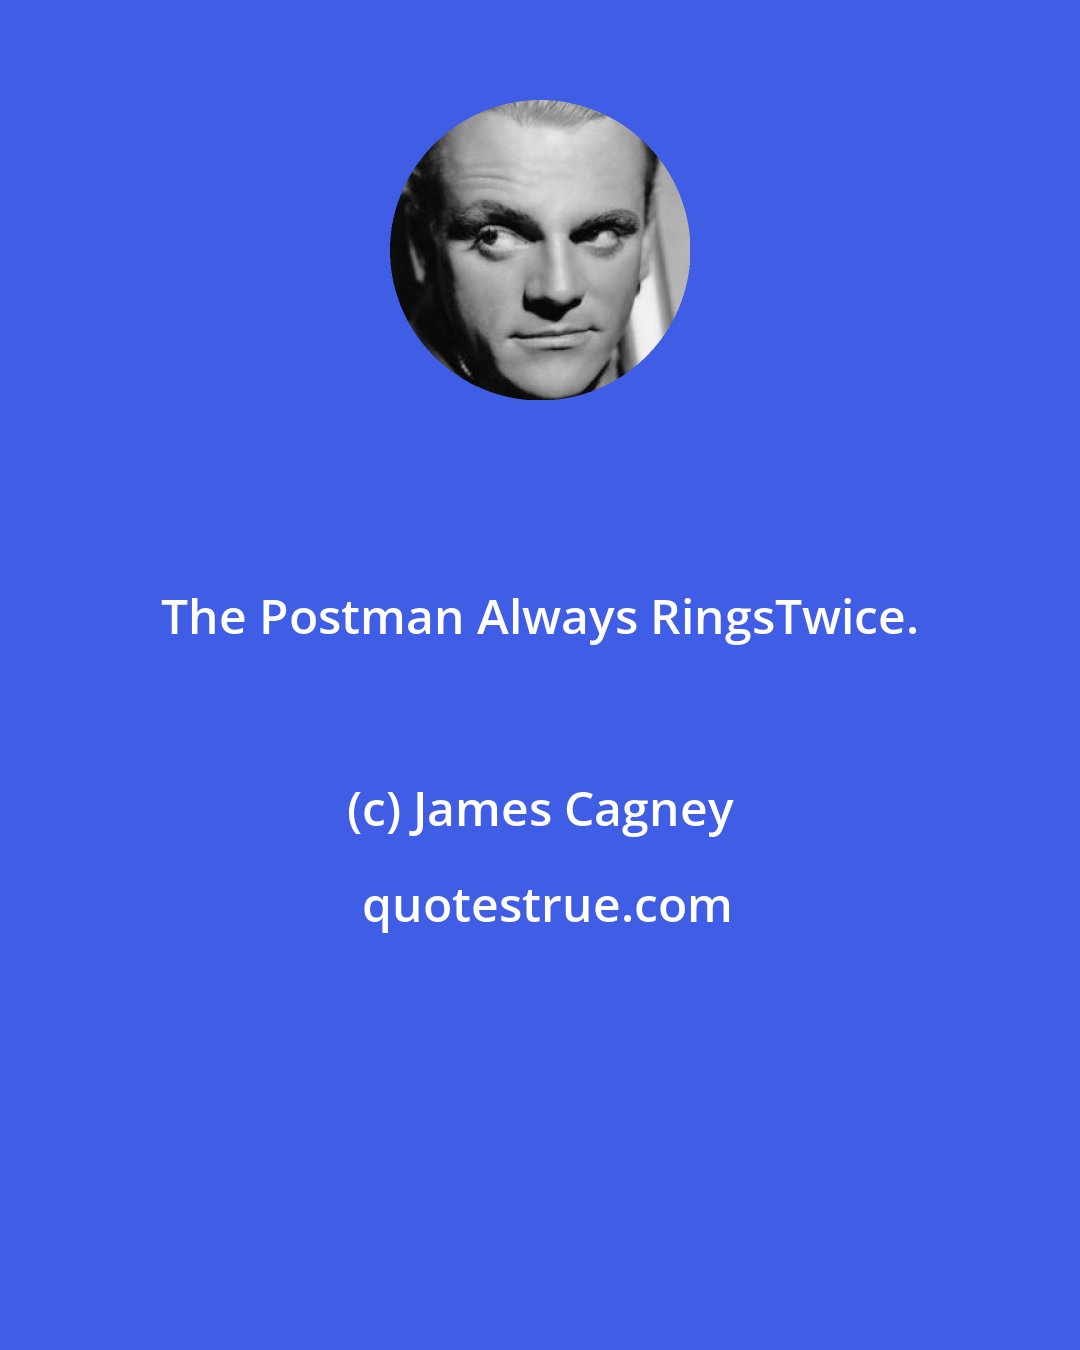 James Cagney: The Postman Always RingsTwice.